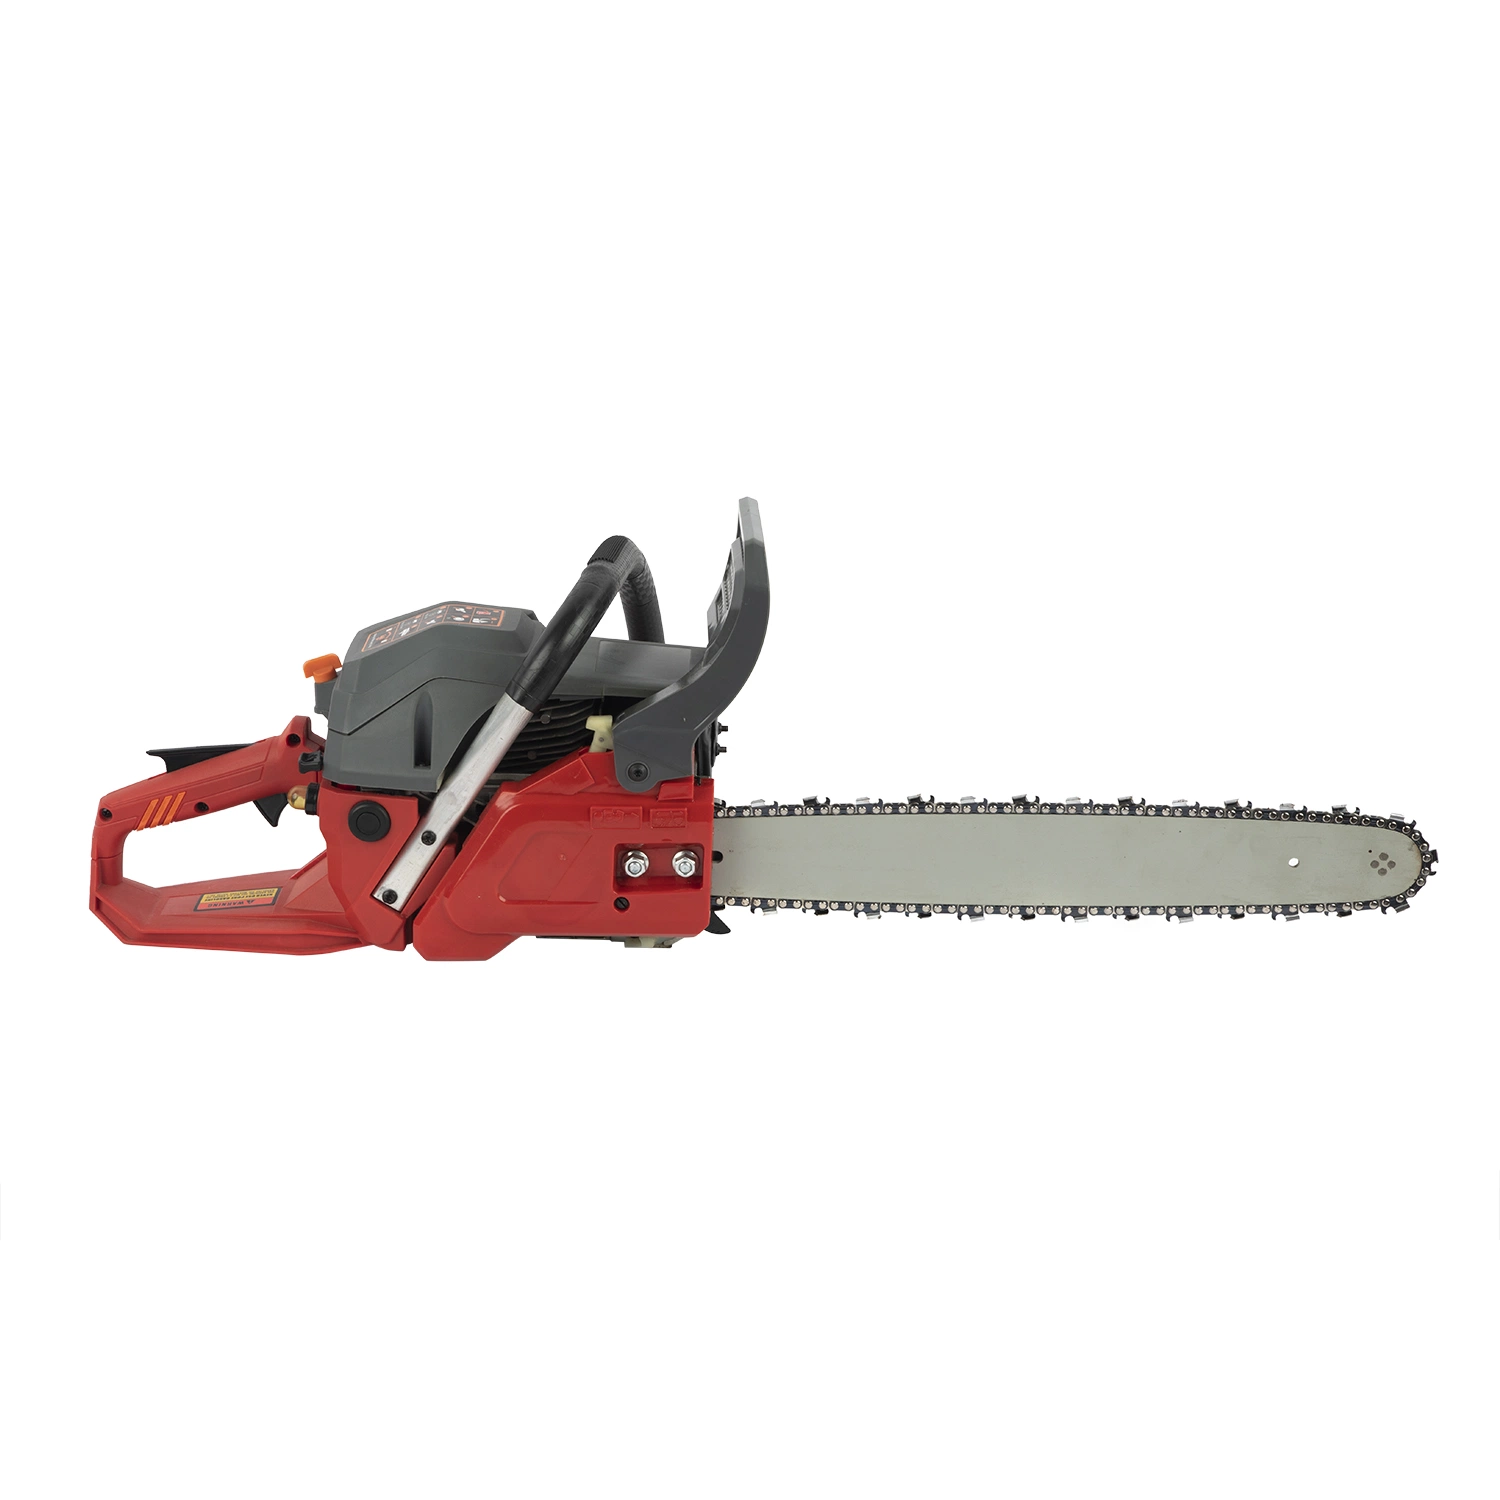 Factory New Design Wood Cutting Machine 25cc to 58cc Power Petrol Hand Chainsaw Diamond Gasoline Two Stroke Bar Chain Saw with Agricultural Machinery